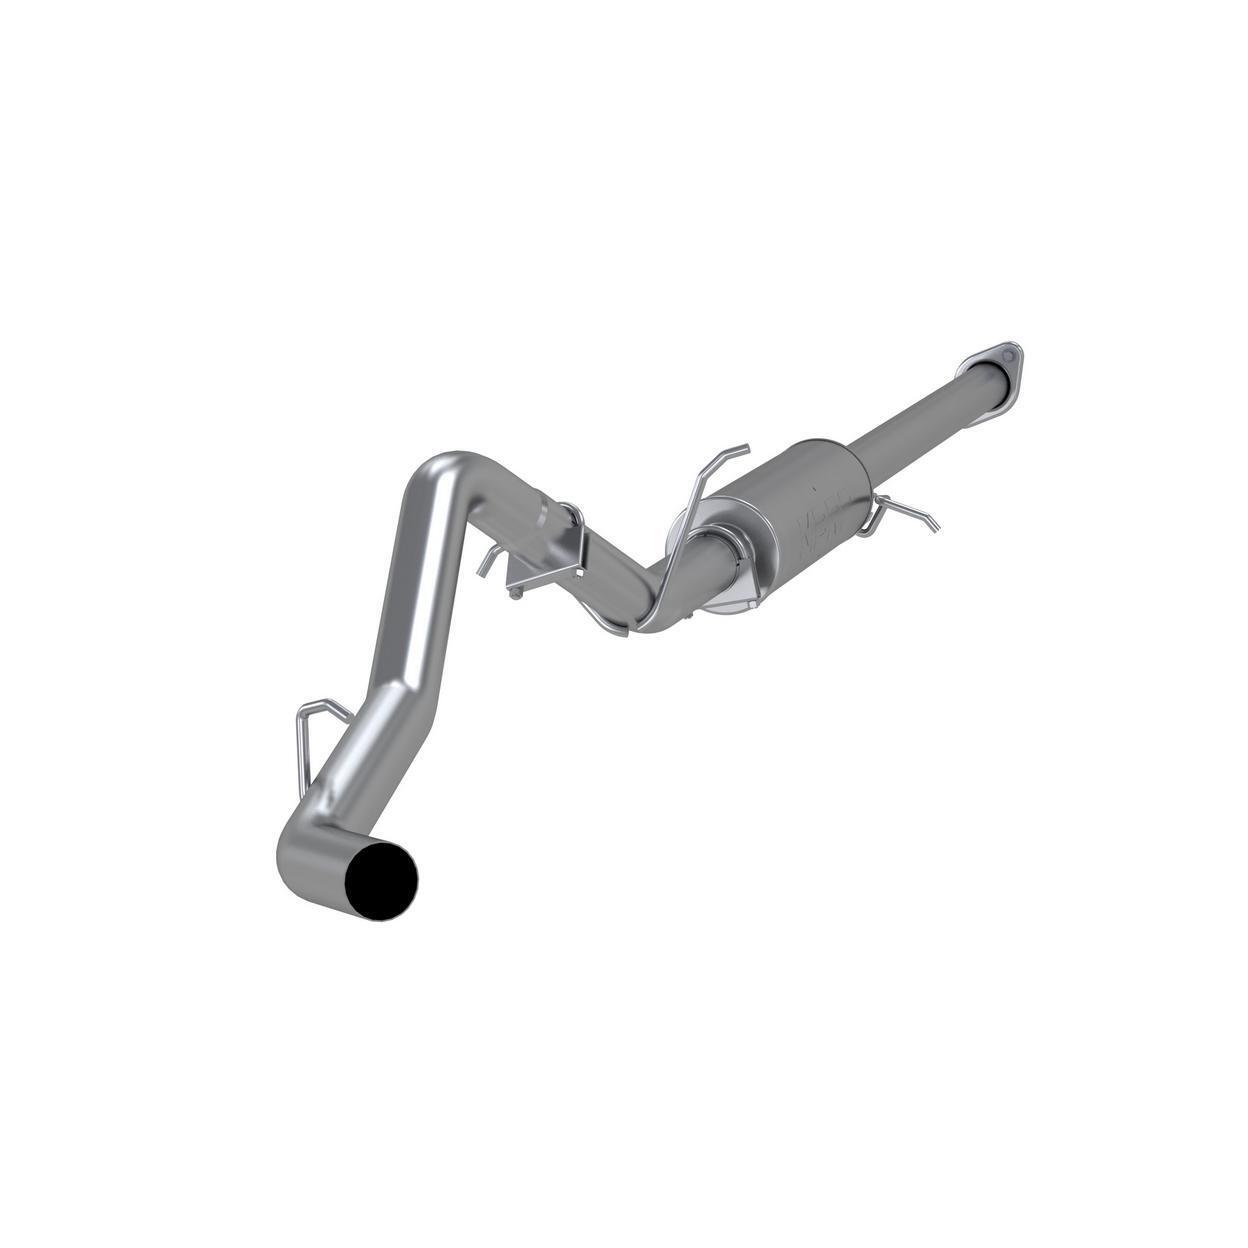 MBRP Exhaust S5036P-KZ Exhaust System Kit for 2007-2008 GMC Sierra 1500